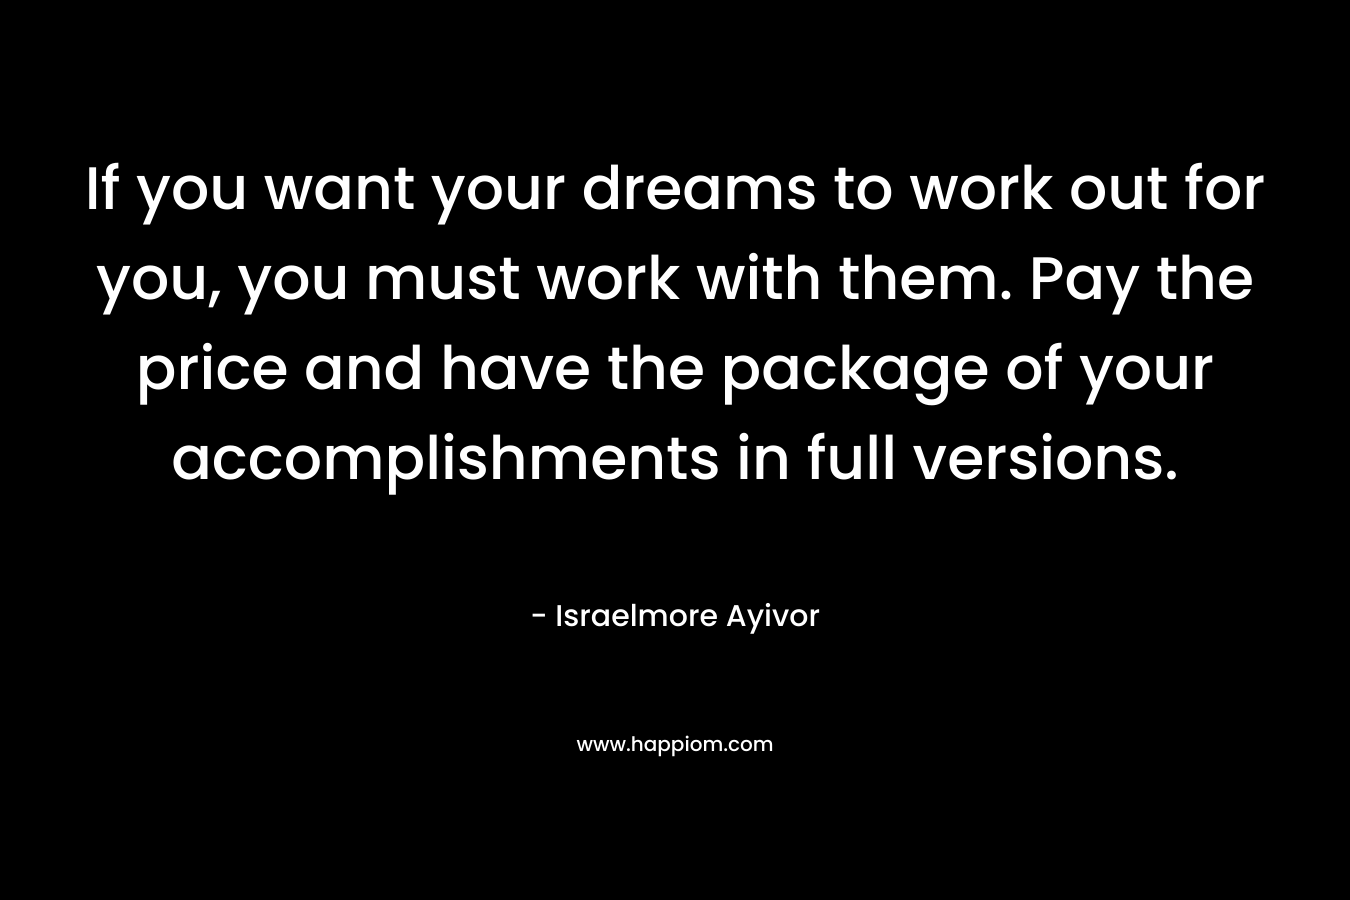 If you want your dreams to work out for you, you must work with them. Pay the price and have the package of your accomplishments in full versions. – Israelmore Ayivor